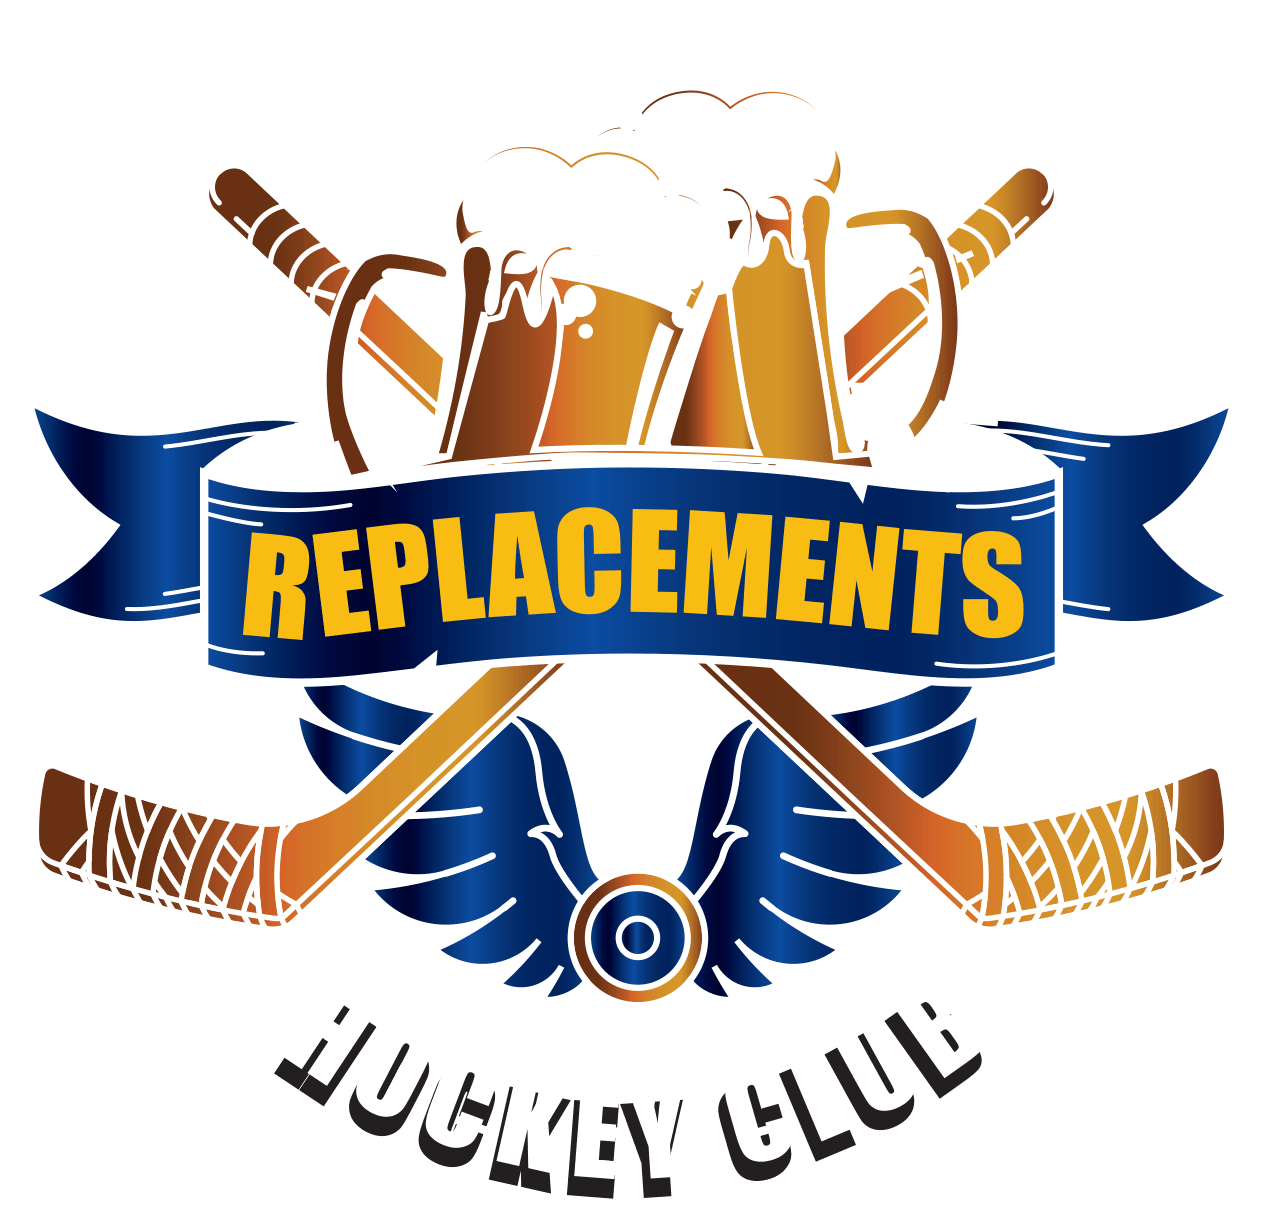 The Replacements Logo - Replacements Rookie League